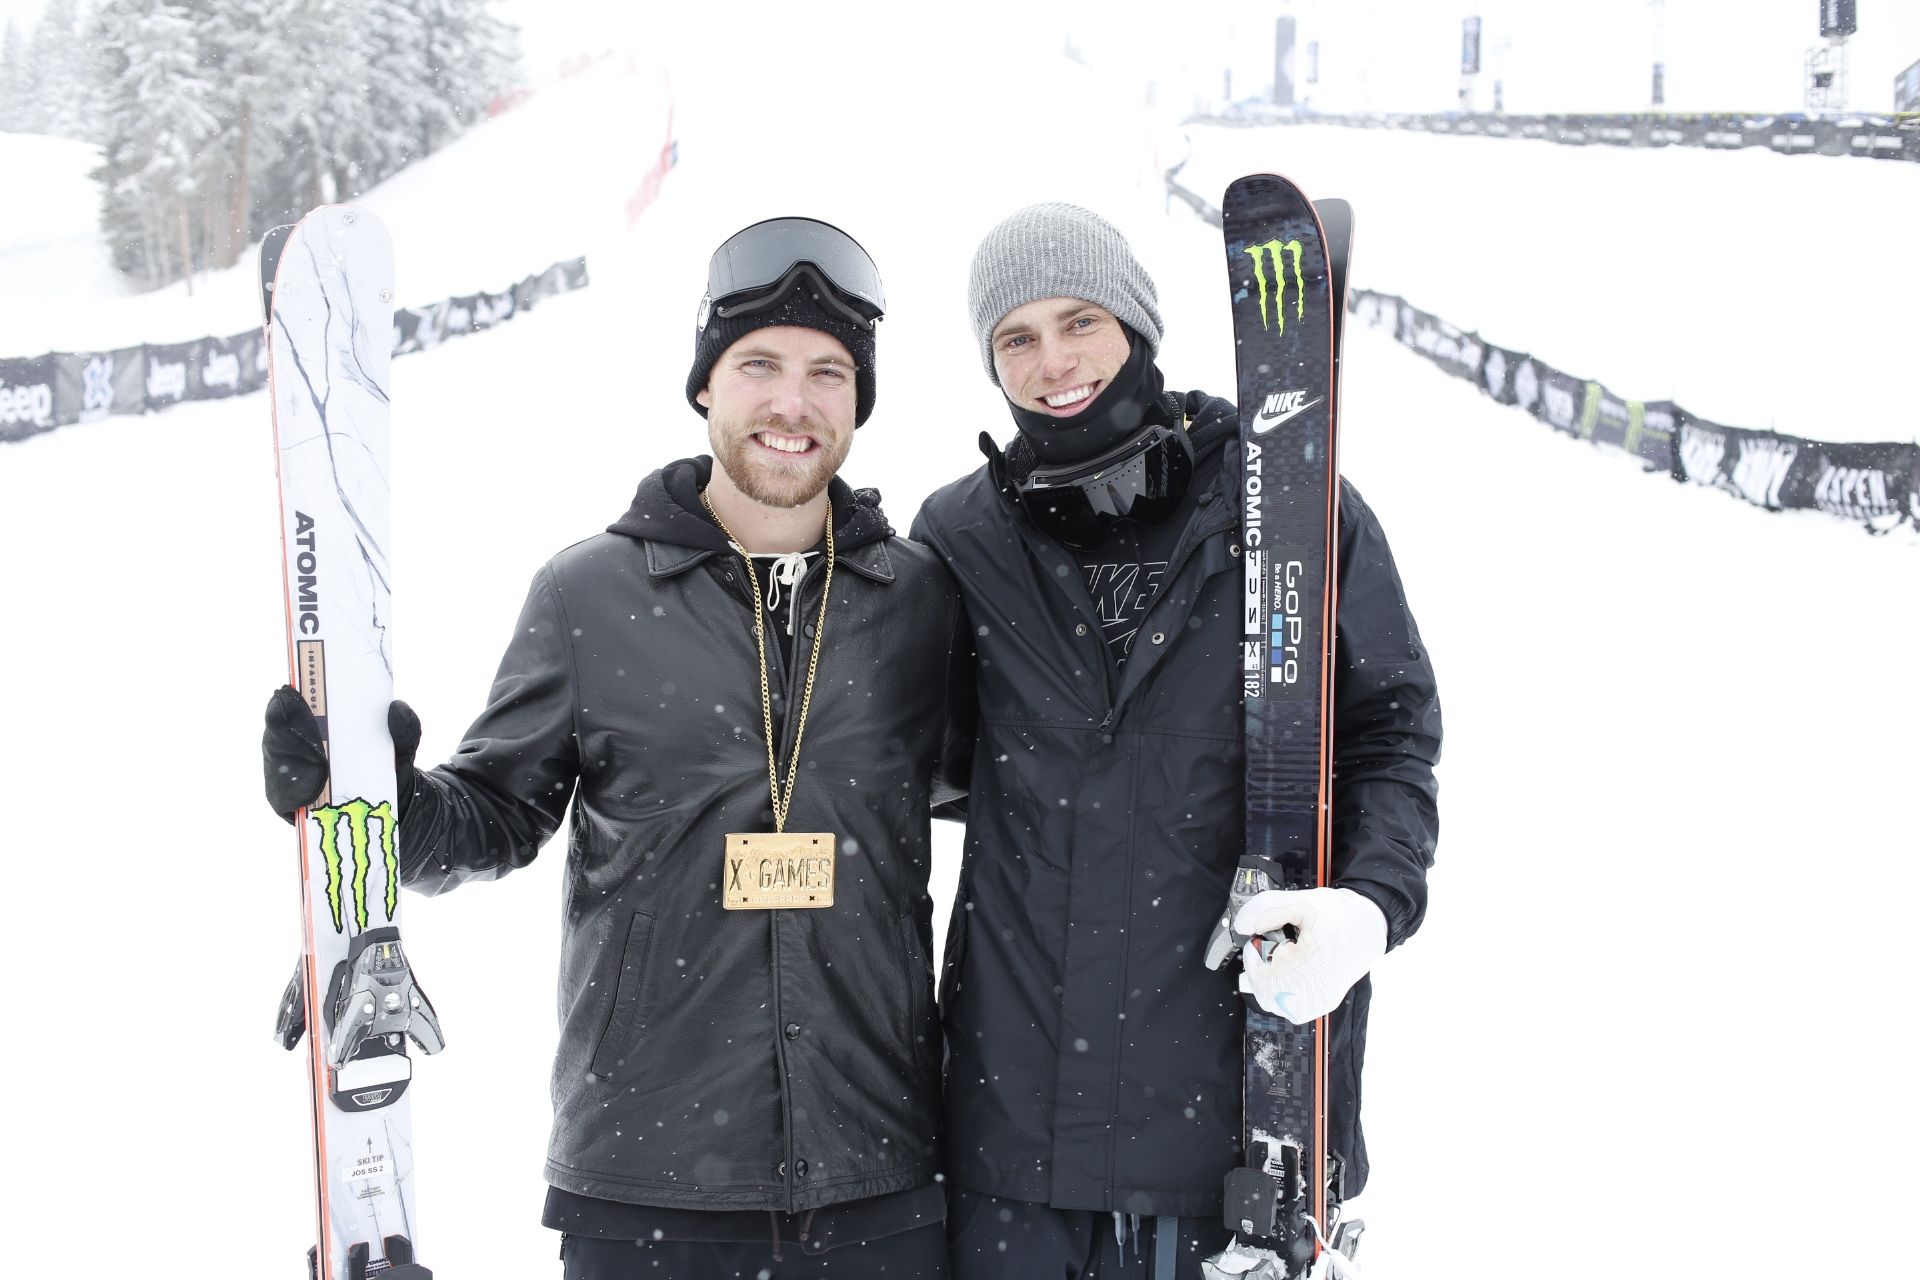 Monster Energy's Jossi Wells and Gus Kenworthy will compete in Ski Slopestyle and Ski Big Air at X Games Norway 2017